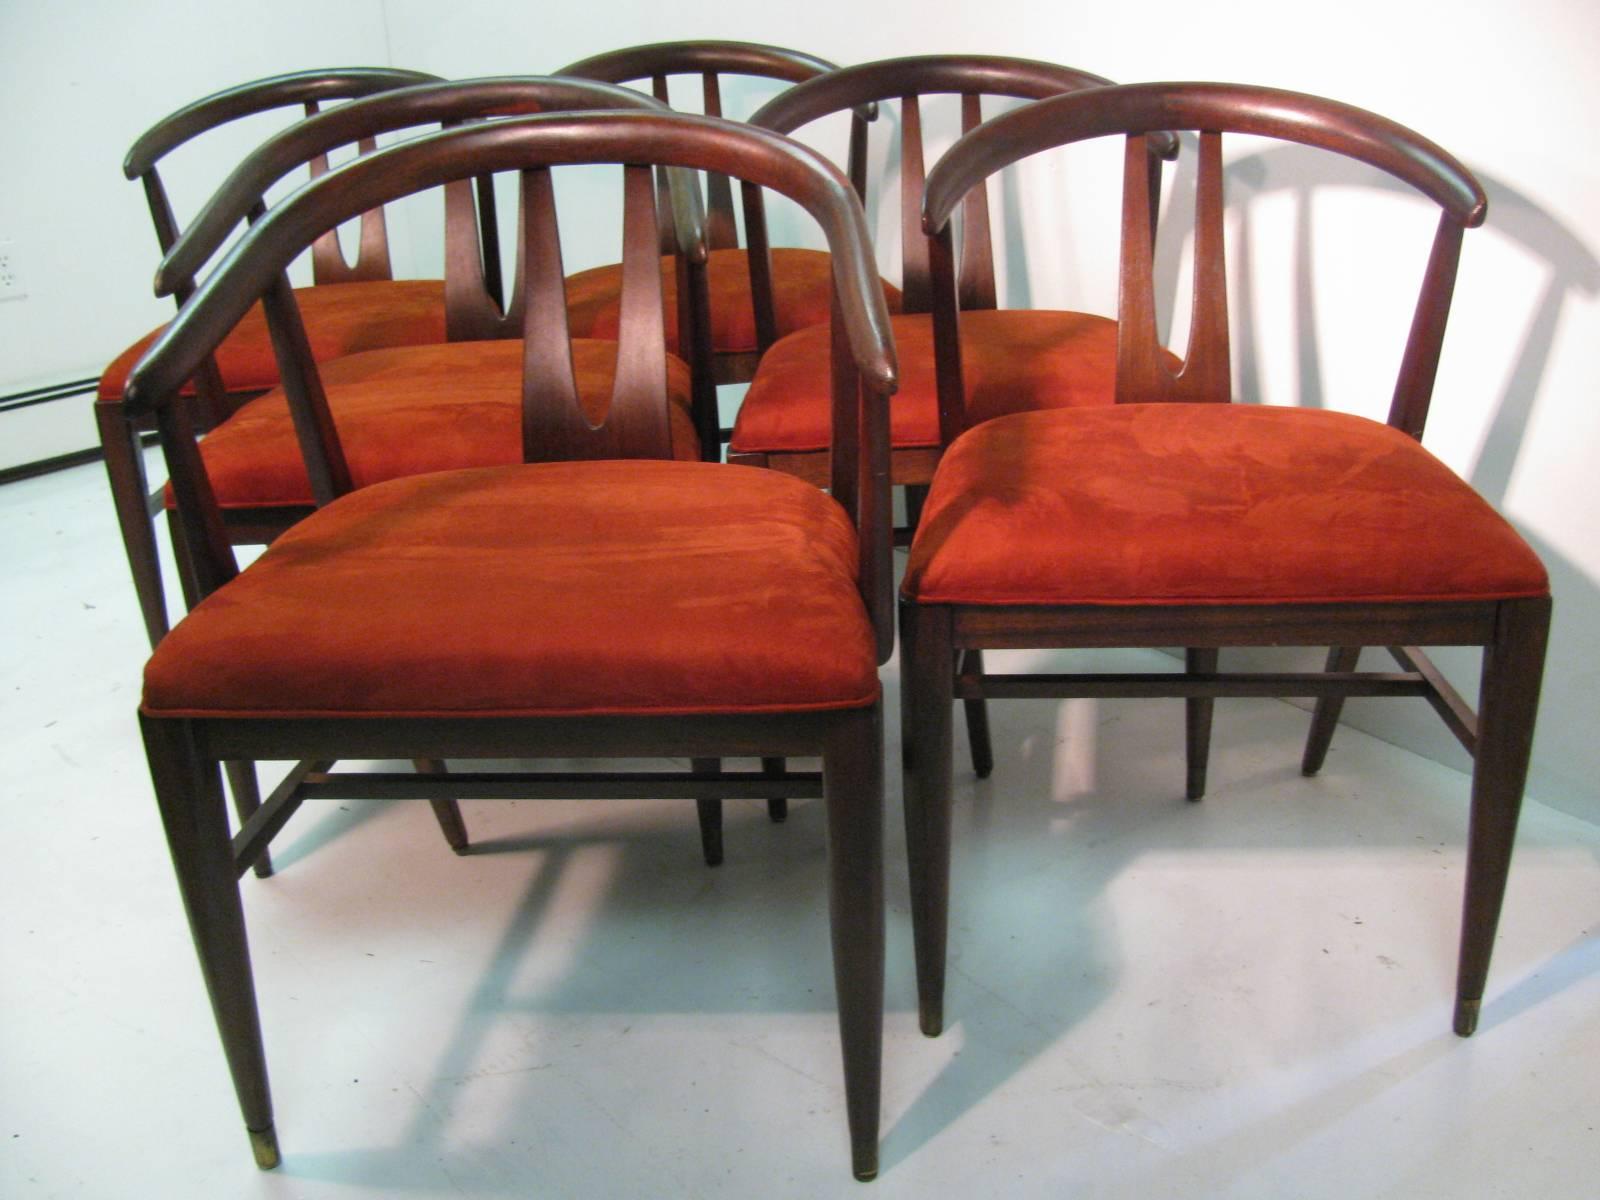 Beautiful and fully restored mahogany chairs. Newly upholstered in a cinnamon-red cotton velvet. Dovetailed construction on the backs of each chair. 5 chairs were just added to this set of 6, making 11. Now there are 4 arm chairs and 7 sides. All